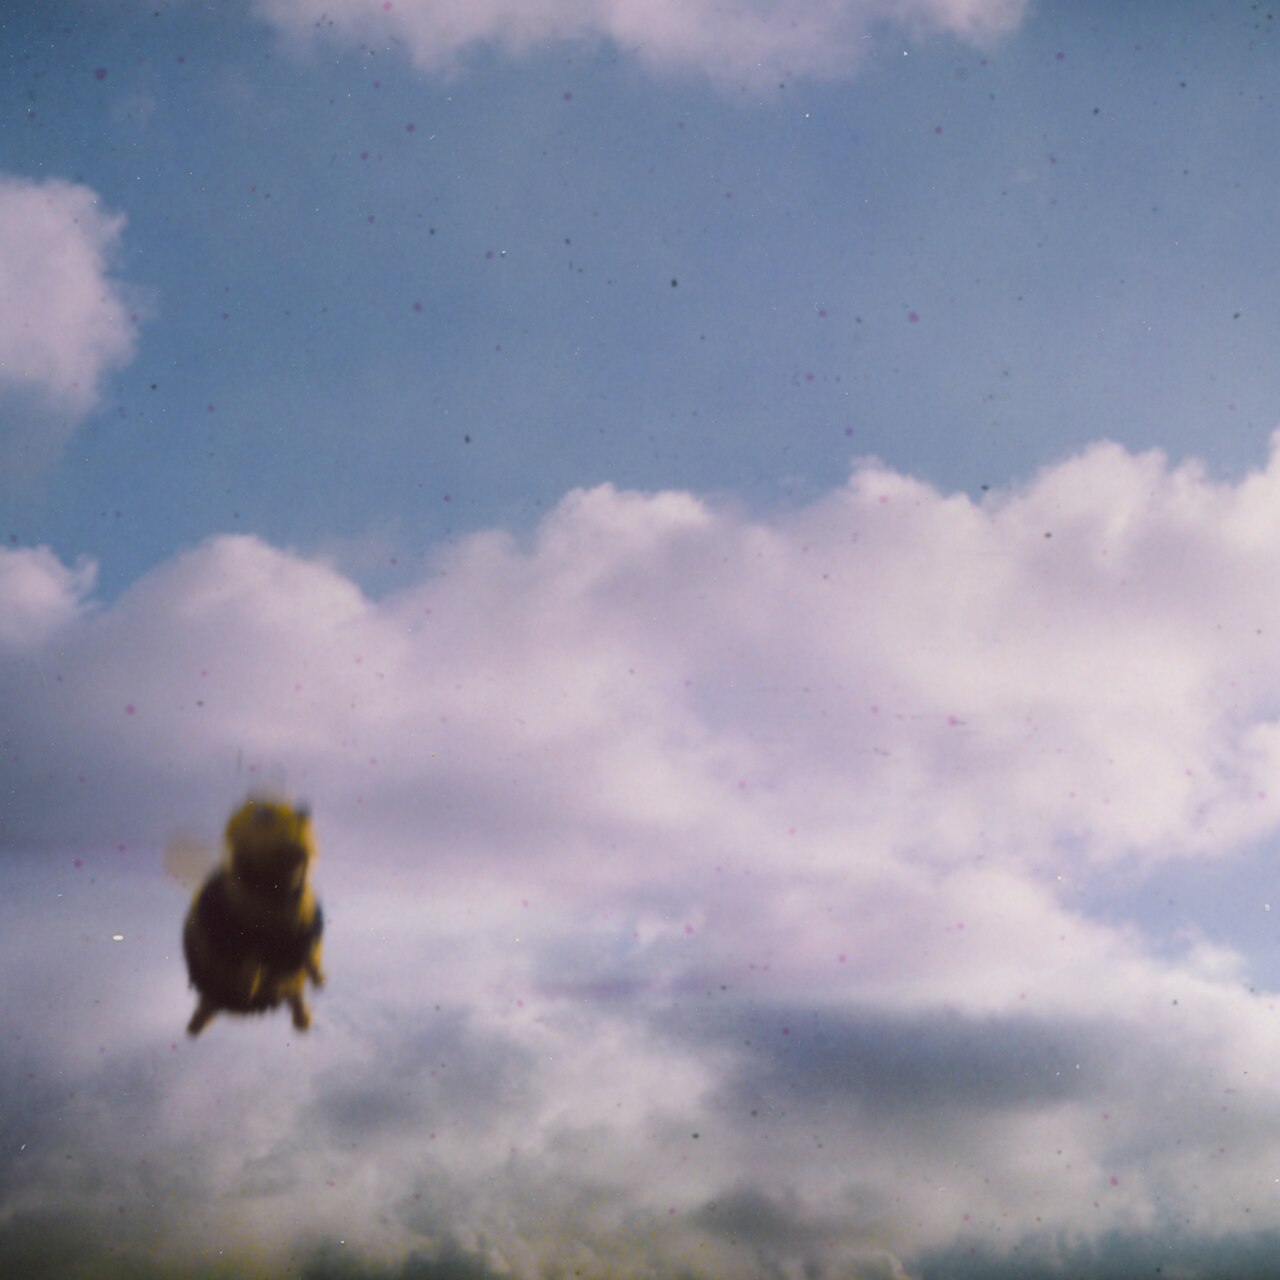 A blue sky with a small blurry fur creature in frame.